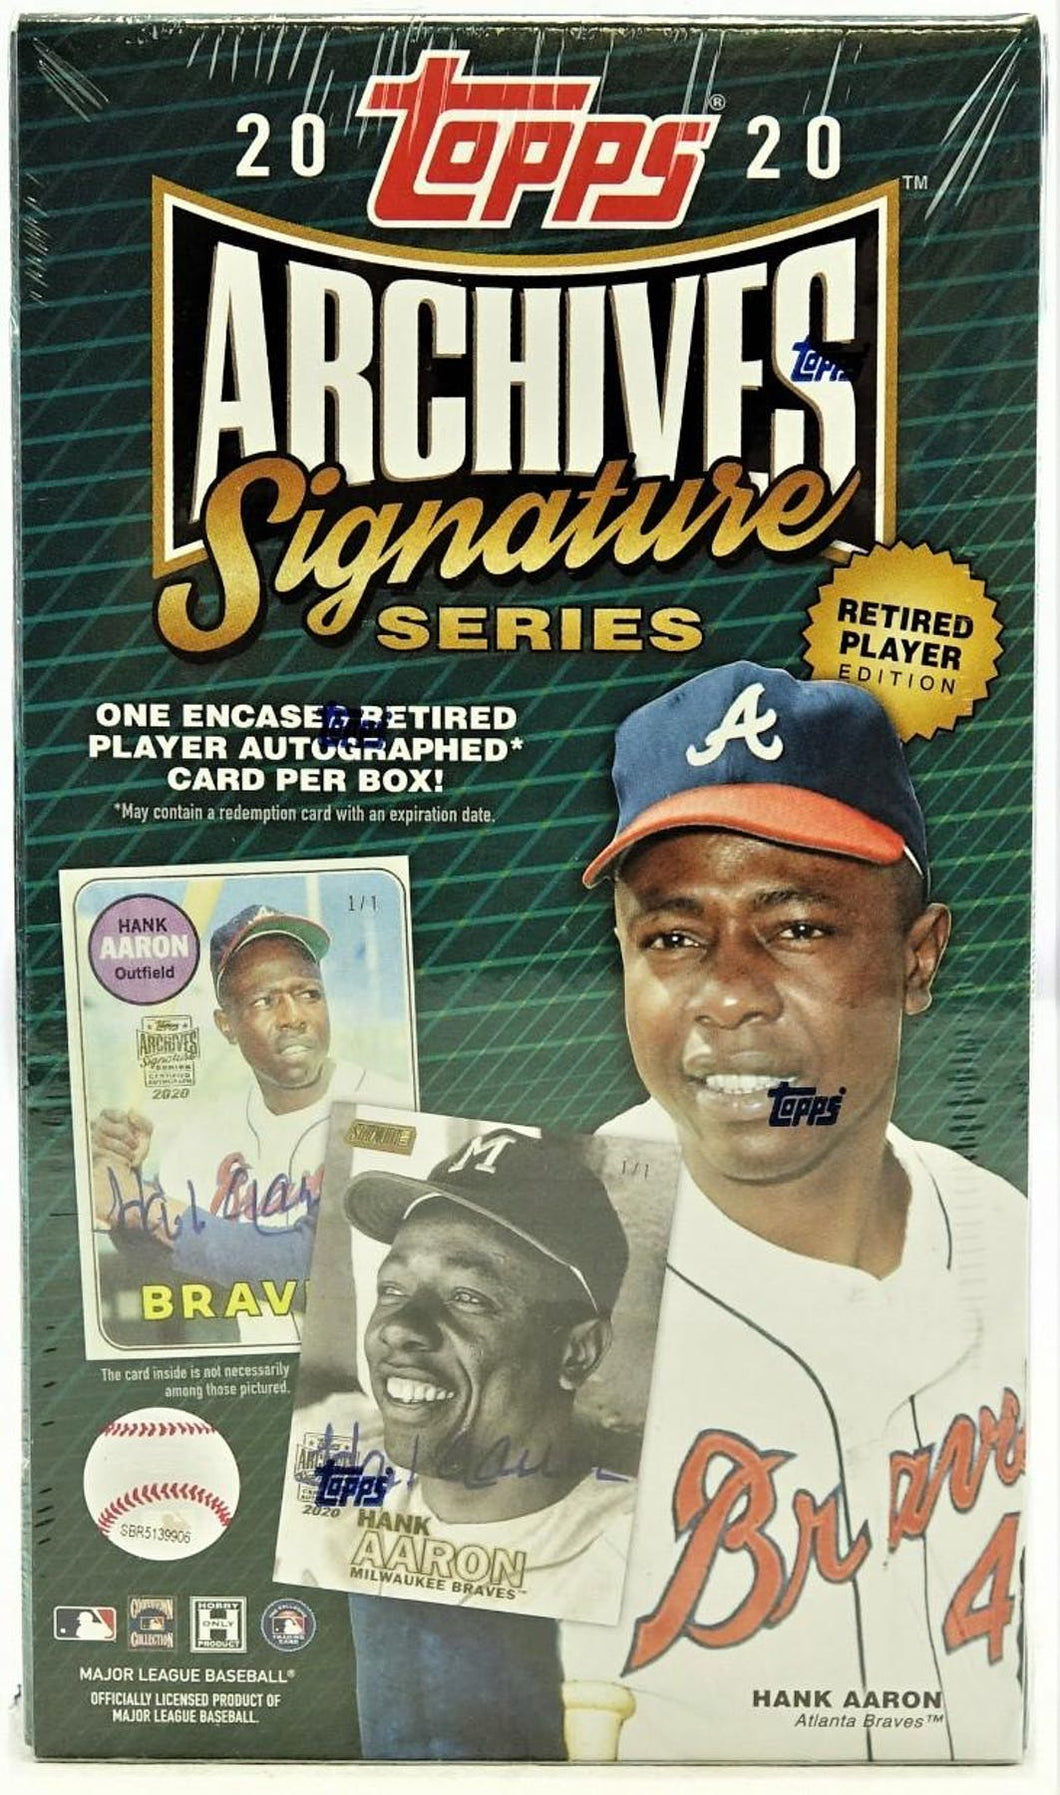 2020 TOPPS ARCHIVES SIGNATURE SERIES RETIRED PLAYER EDITION BASEBALL CARDS (1) RANDOM TEAM #18